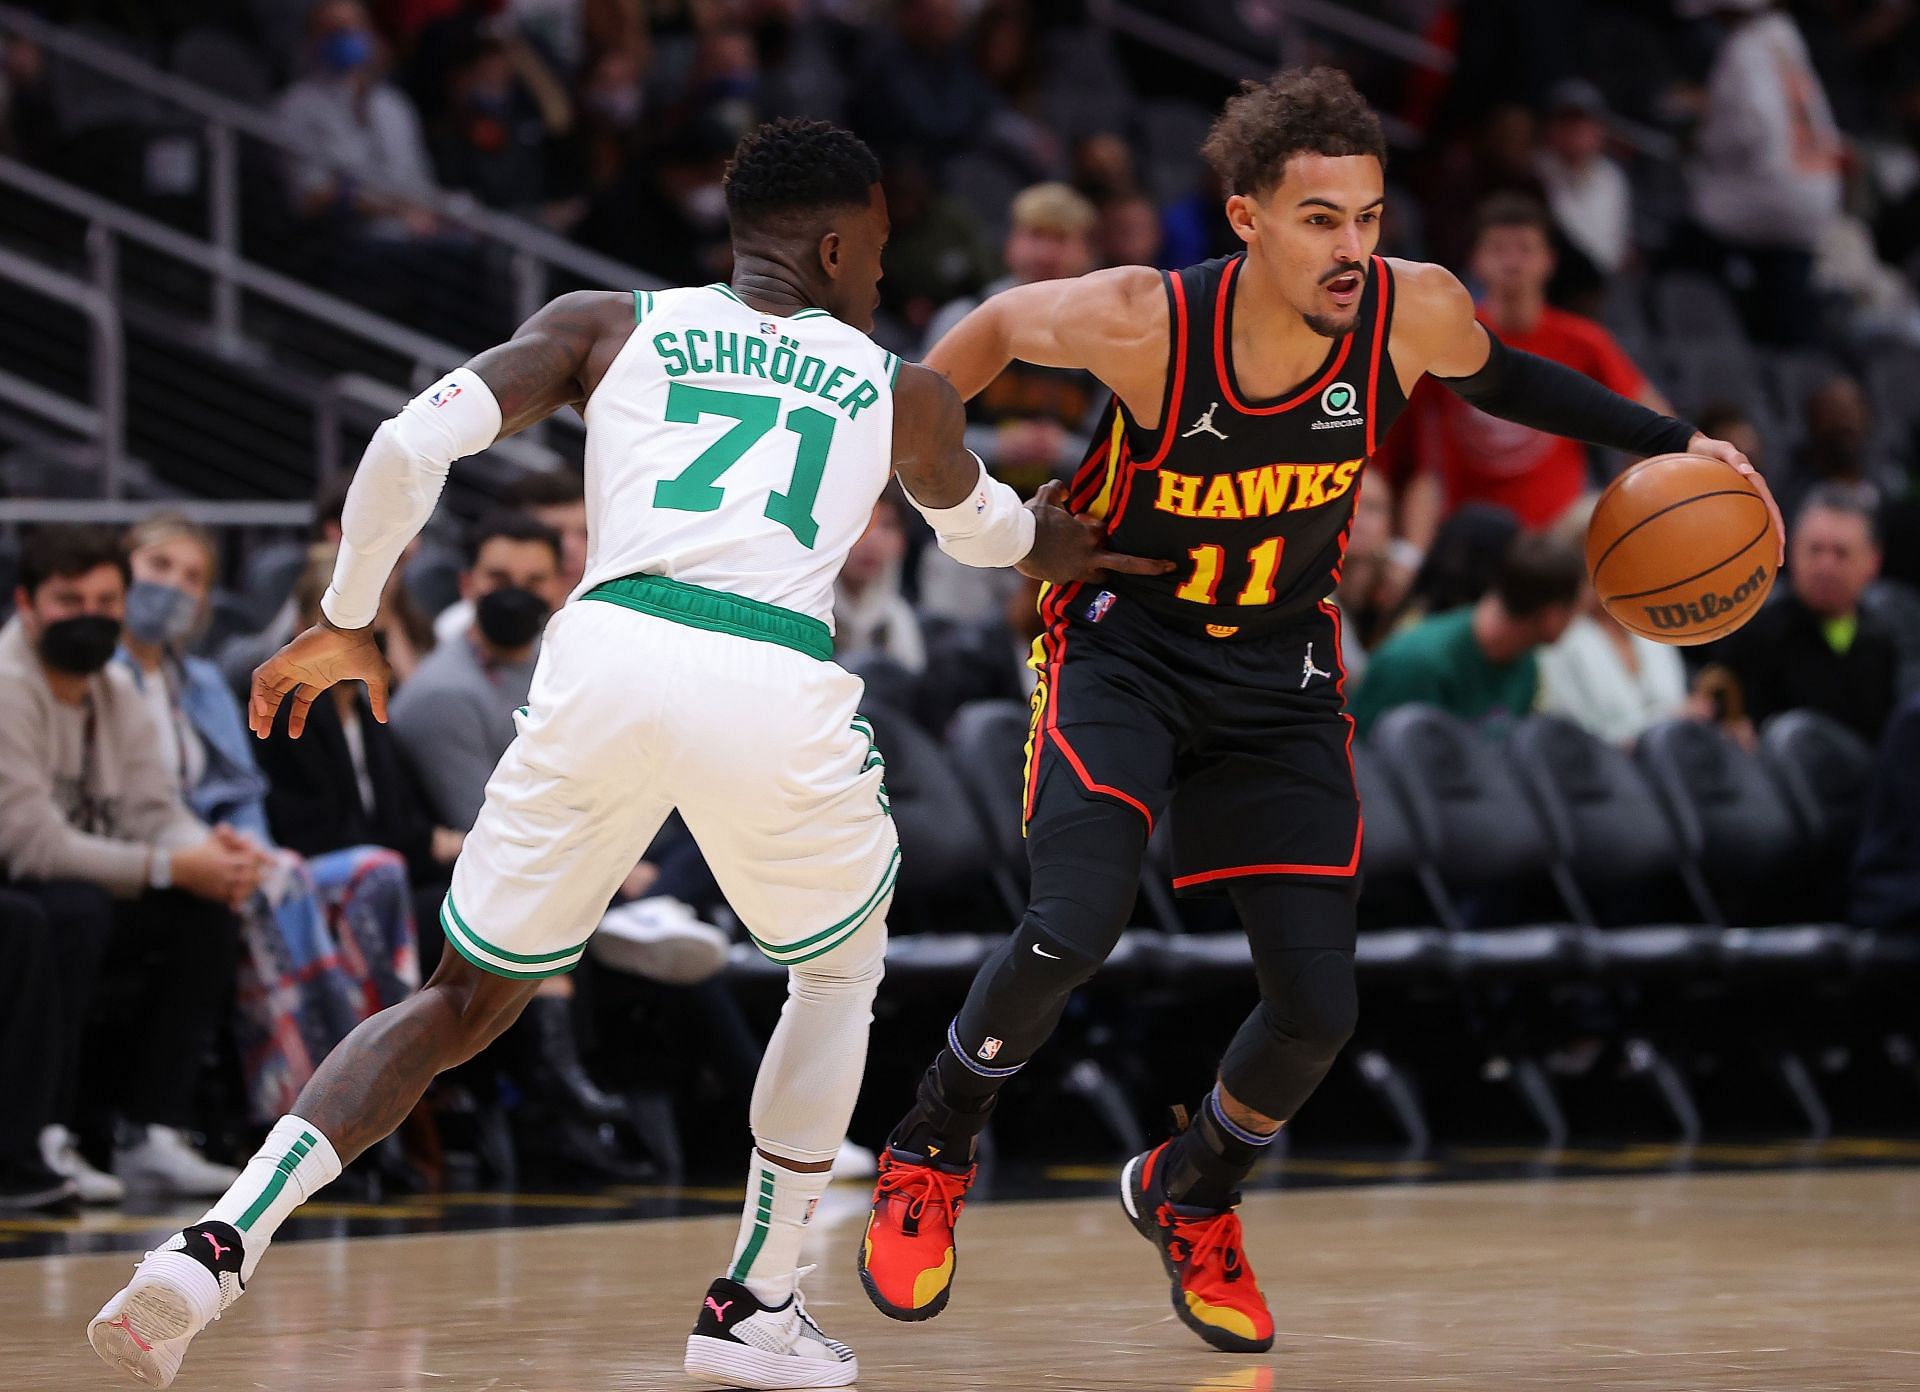 Trae Young #11 of the Atlanta Hawks drives against Dennis Schroder #71 of the Boston Celtics during the first half at State Farm Arena on November 17, 2021 in Atlanta, Georgia.